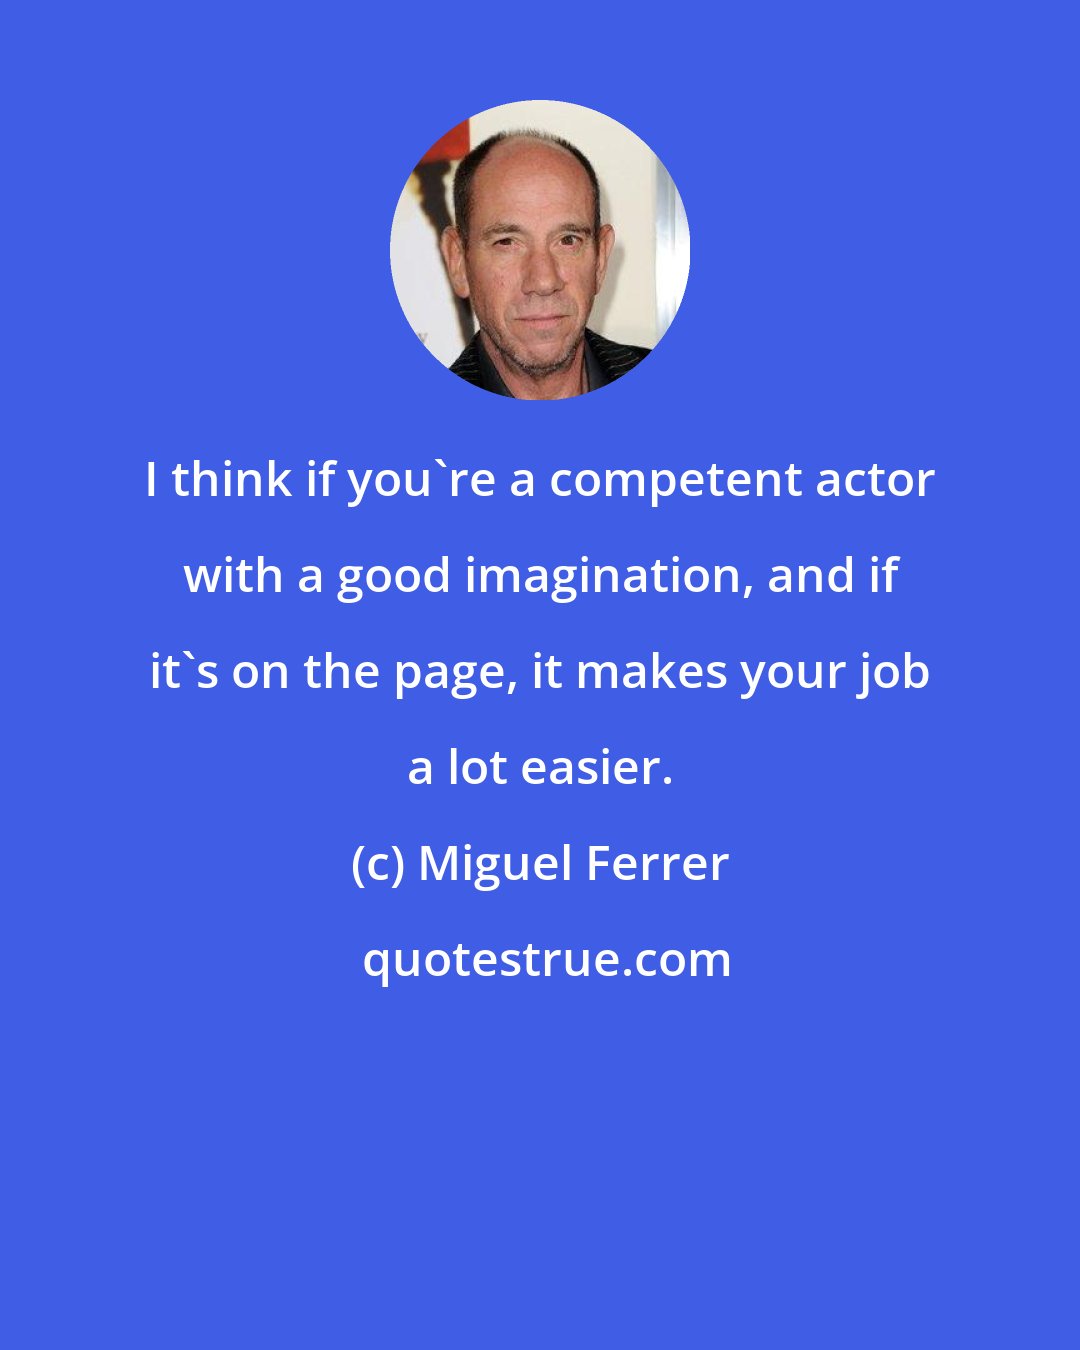 Miguel Ferrer: I think if you're a competent actor with a good imagination, and if it's on the page, it makes your job a lot easier.